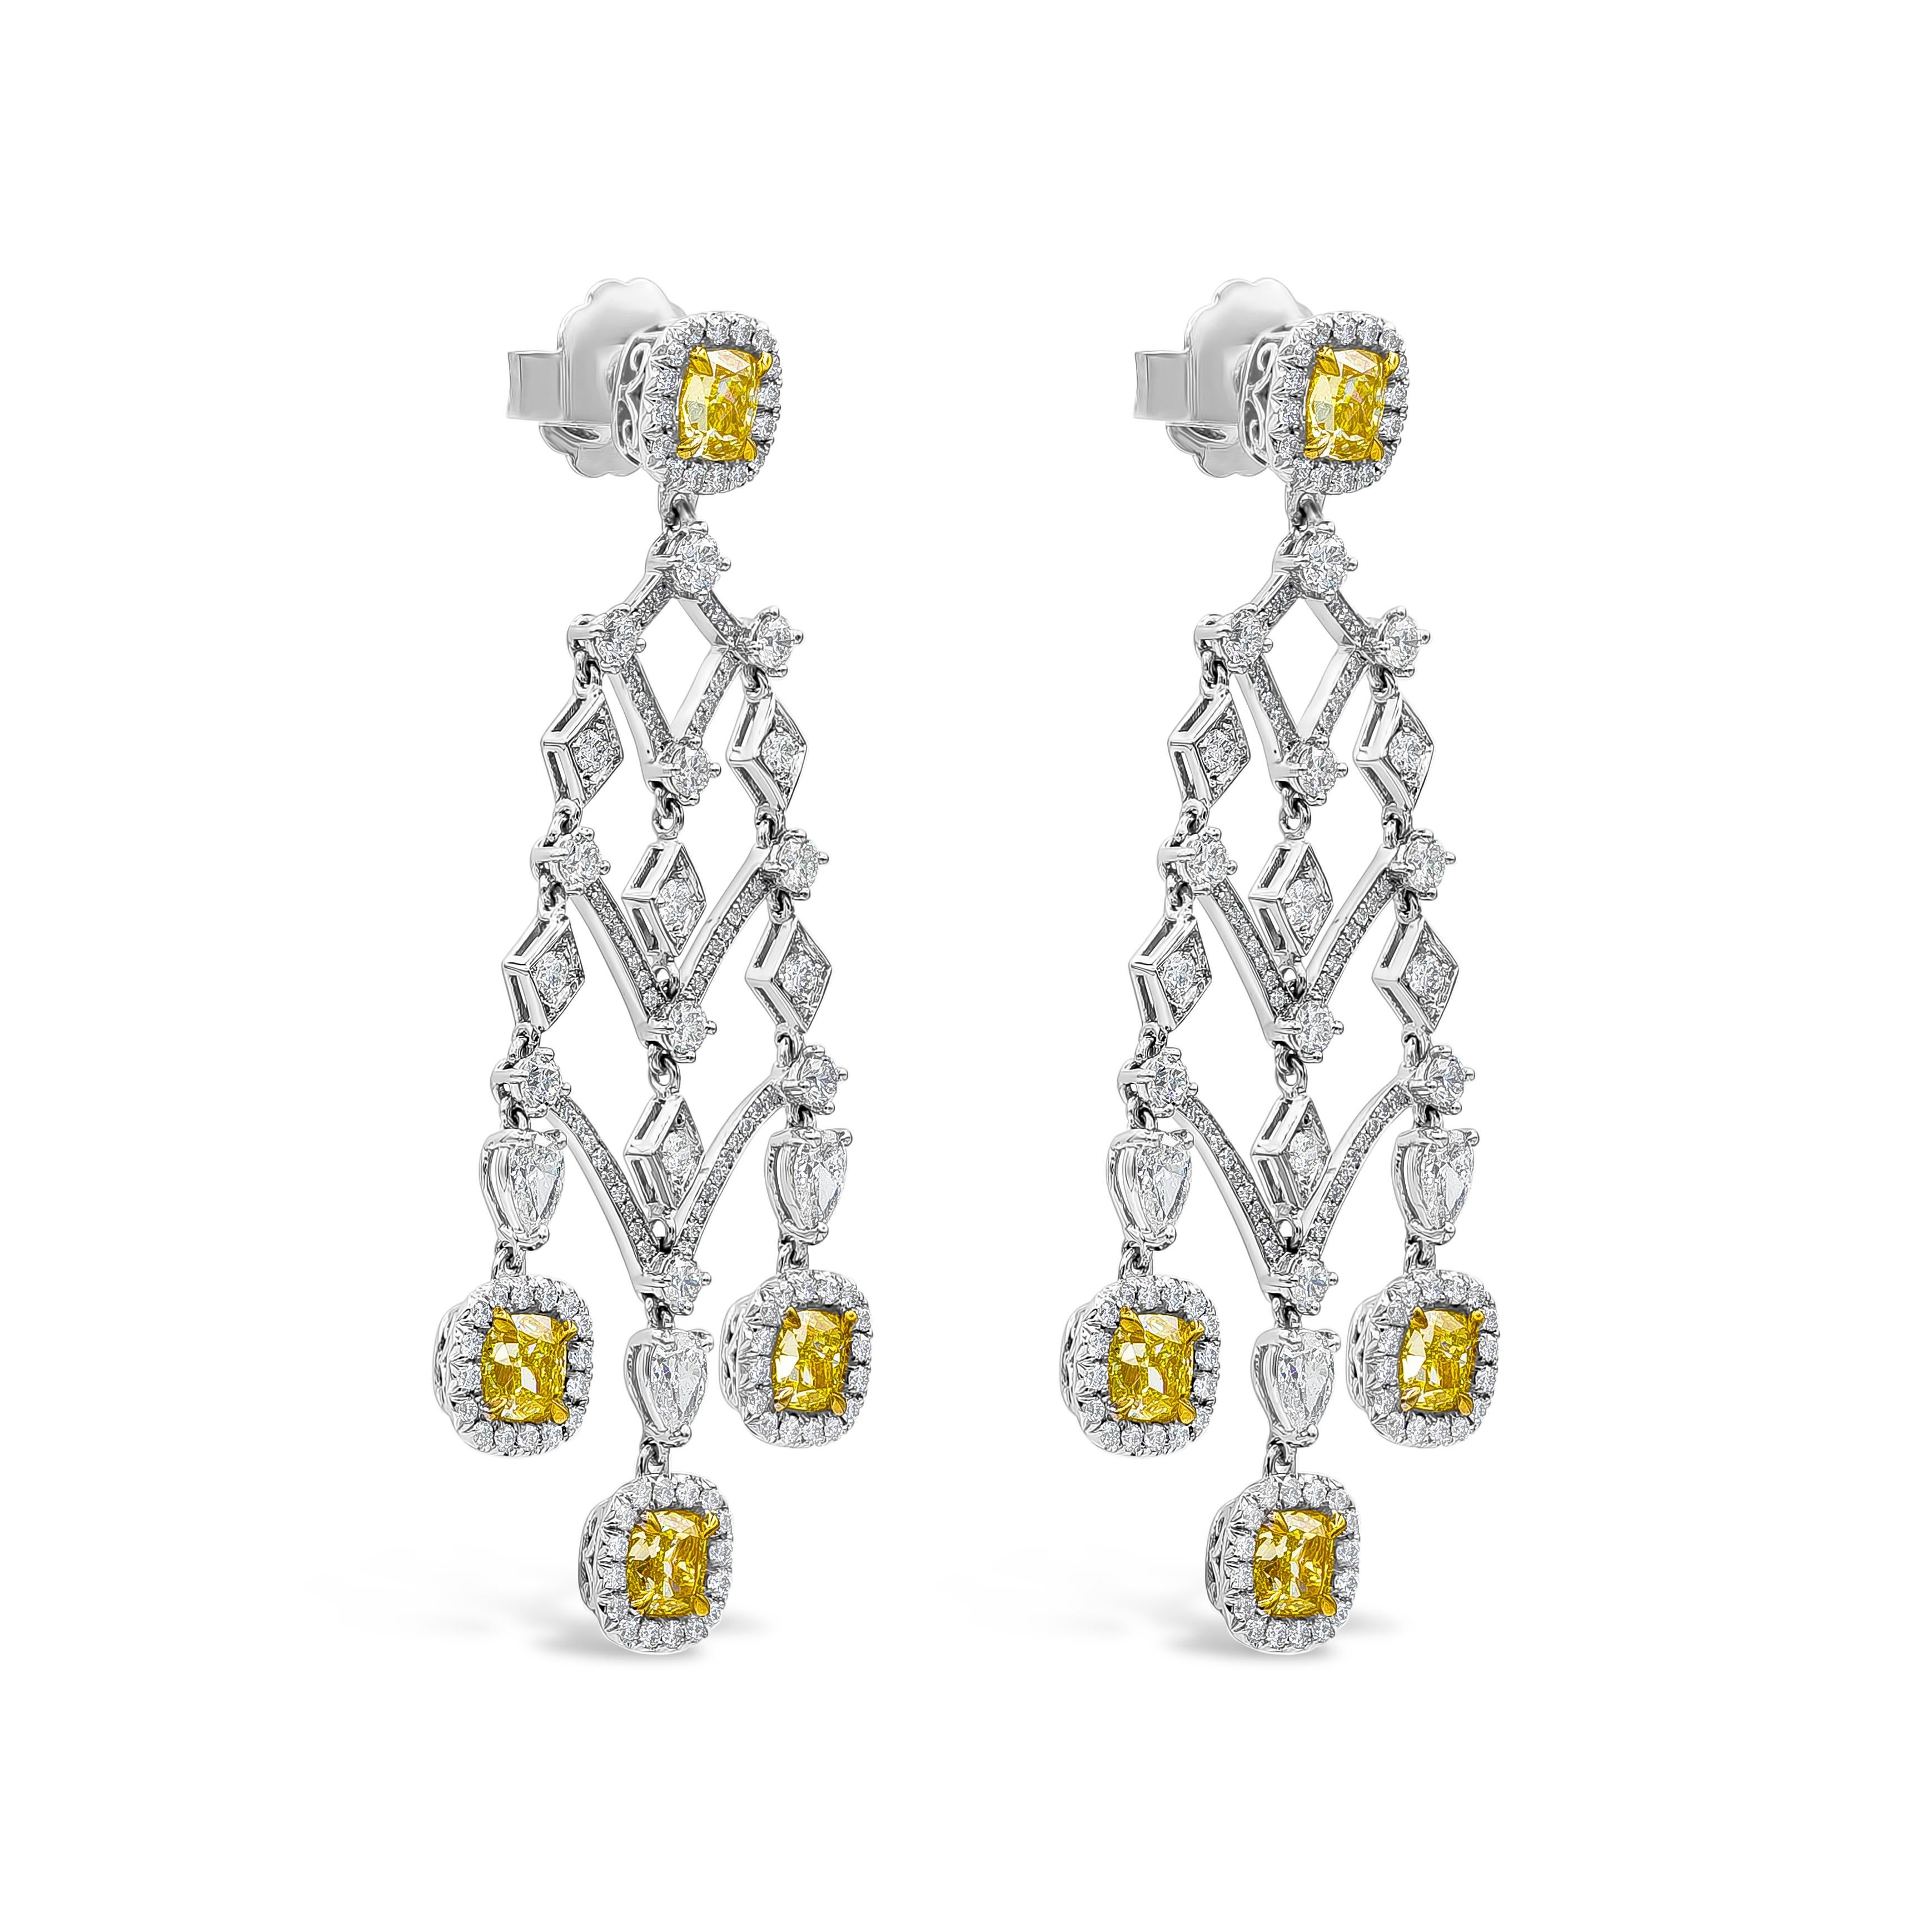 A well-crafted earrings showcasing eight cushion cut fancy yellow diamonds, set in a brilliant diamond halo in an Intricately designed chandelier style. Yellow Diamonds weigh 4.98 carats total; white diamonds weigh 4.41 carats total. Finely made in